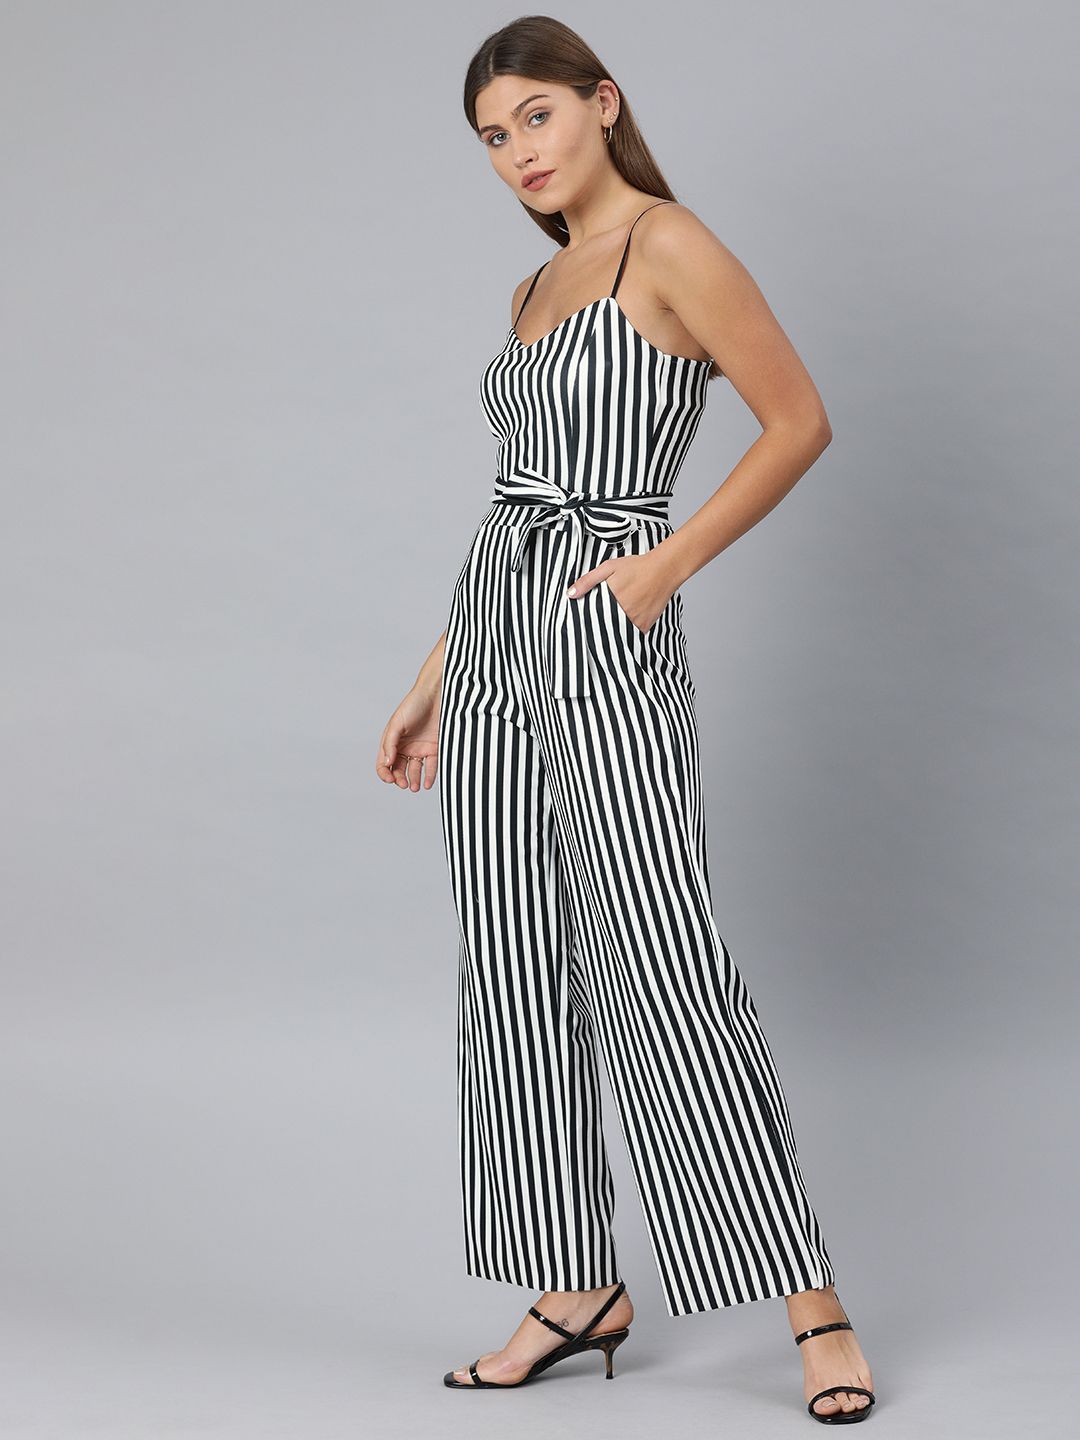 ONLY Women Black & White Striped Basic Jumpsuit Price in India